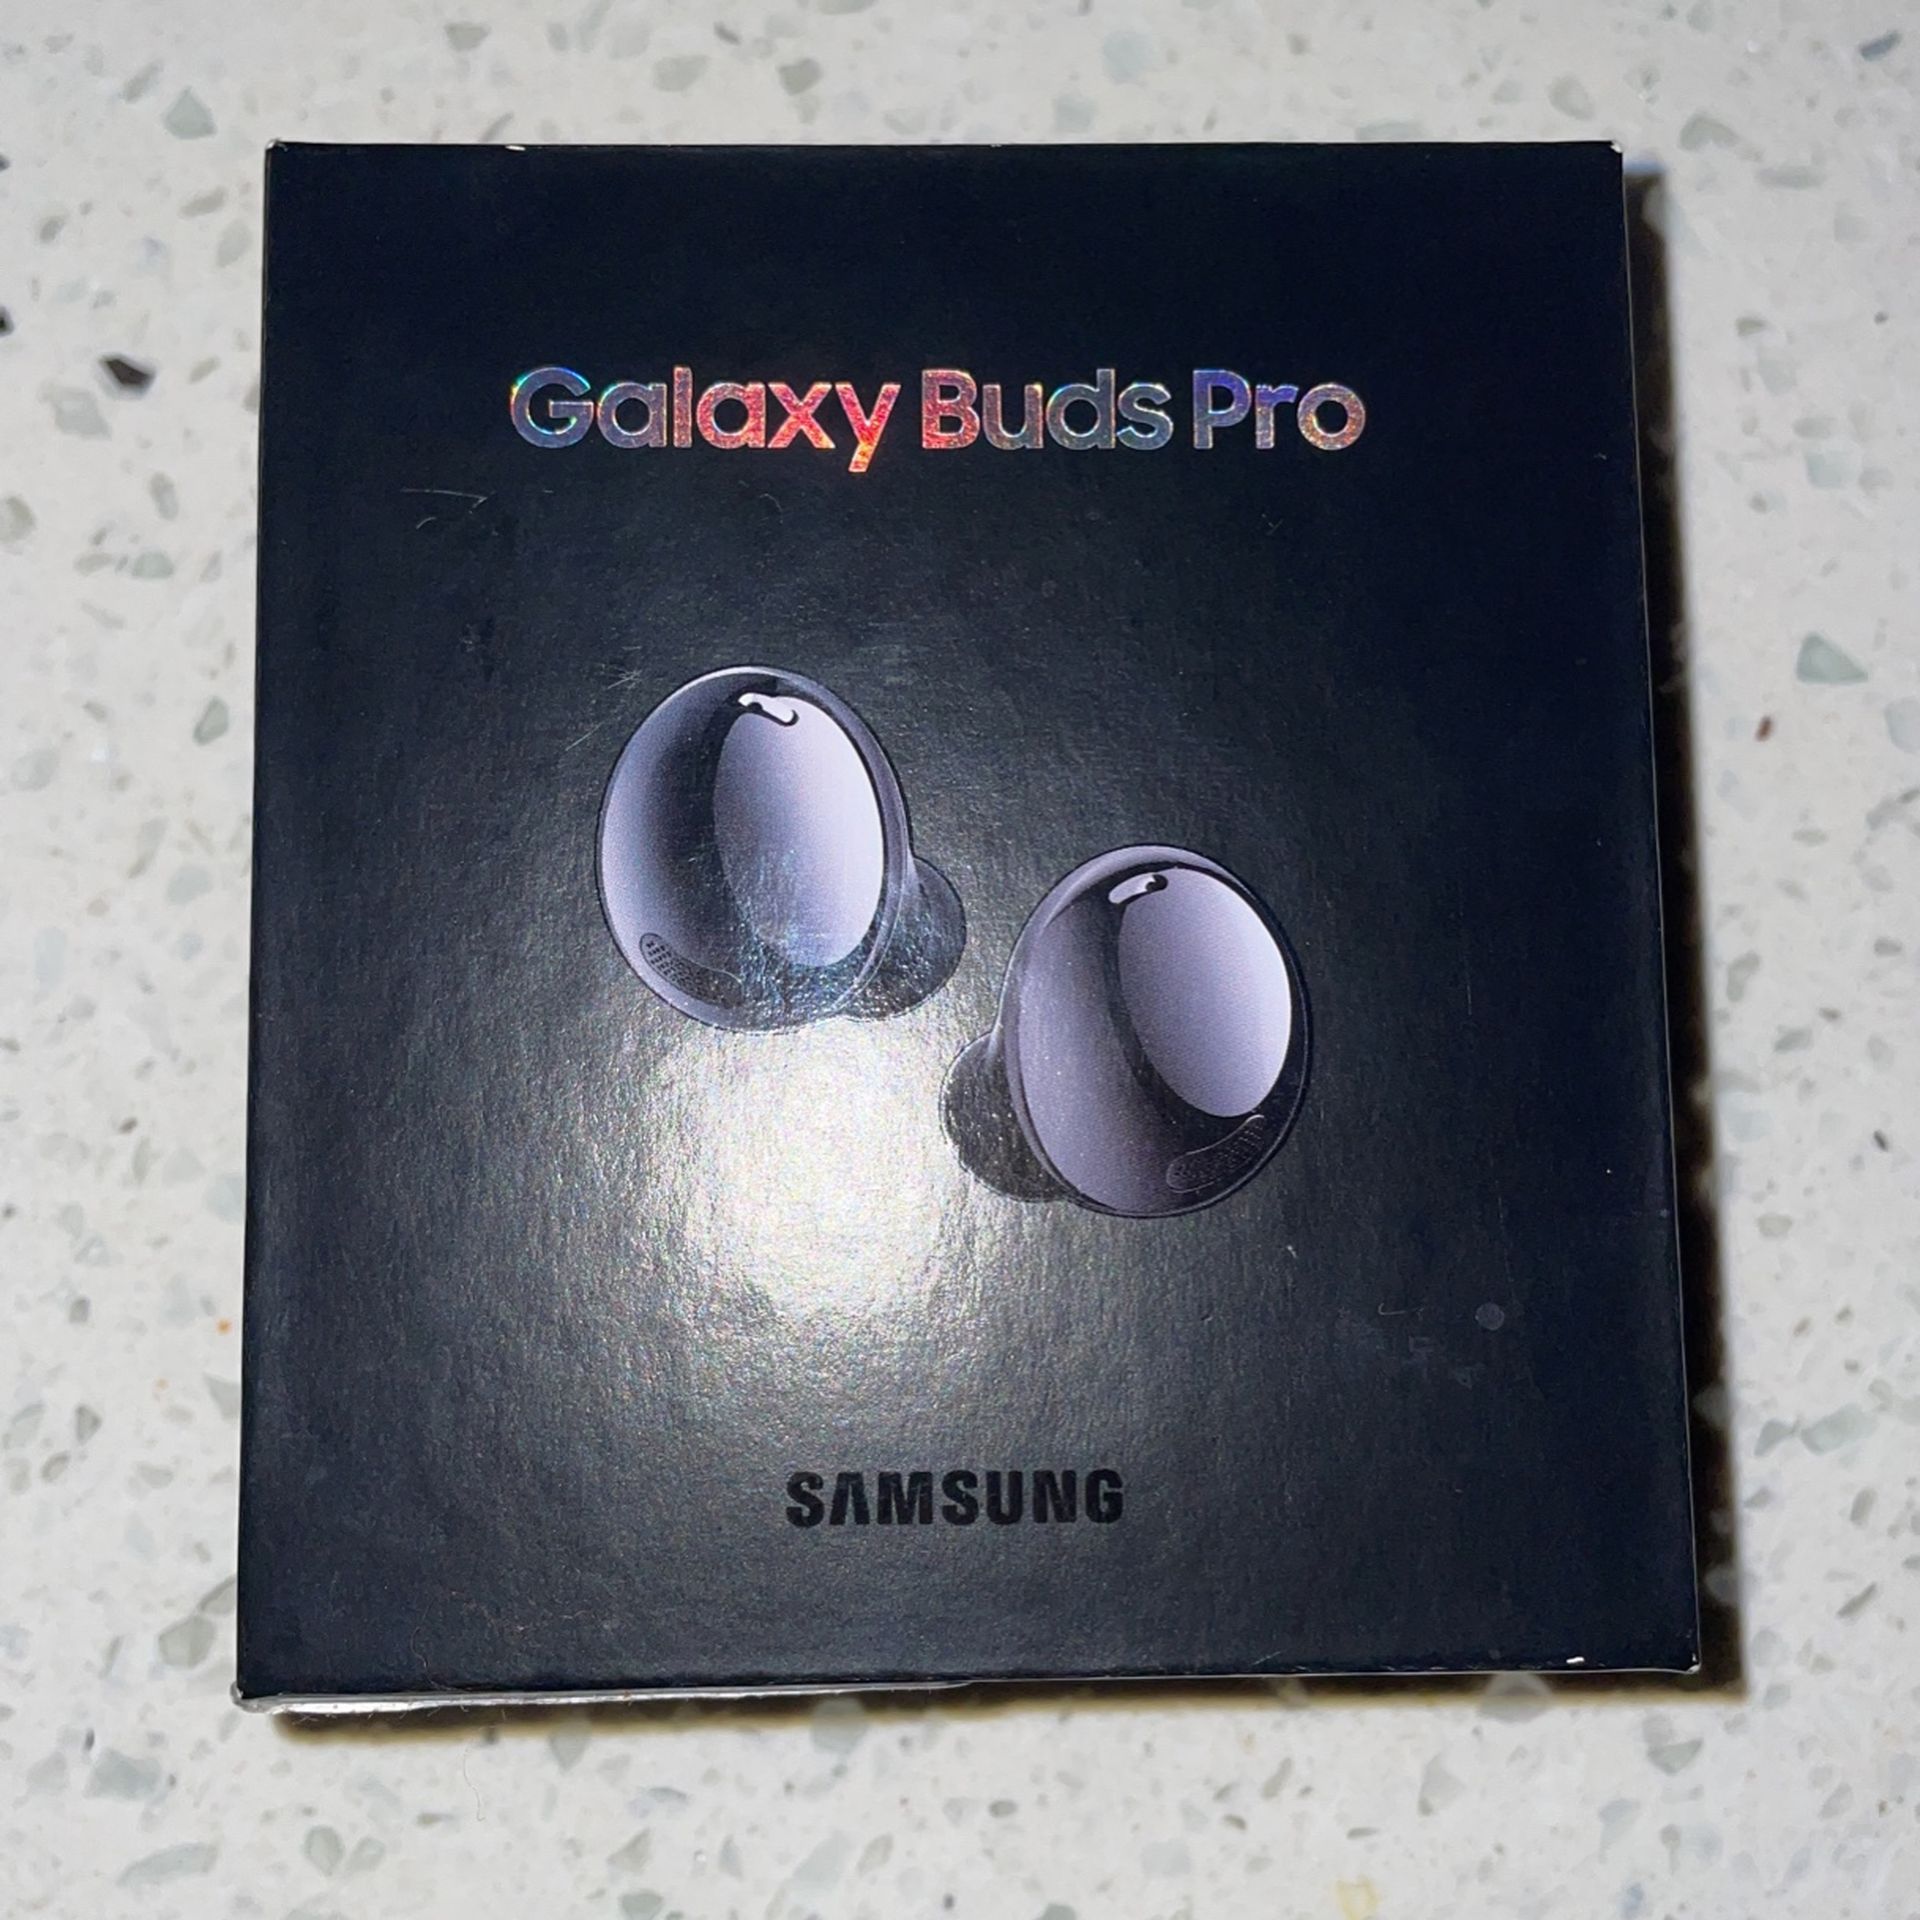 Samsung Earbuds Pros For Sale! Brand New Sealed In Box